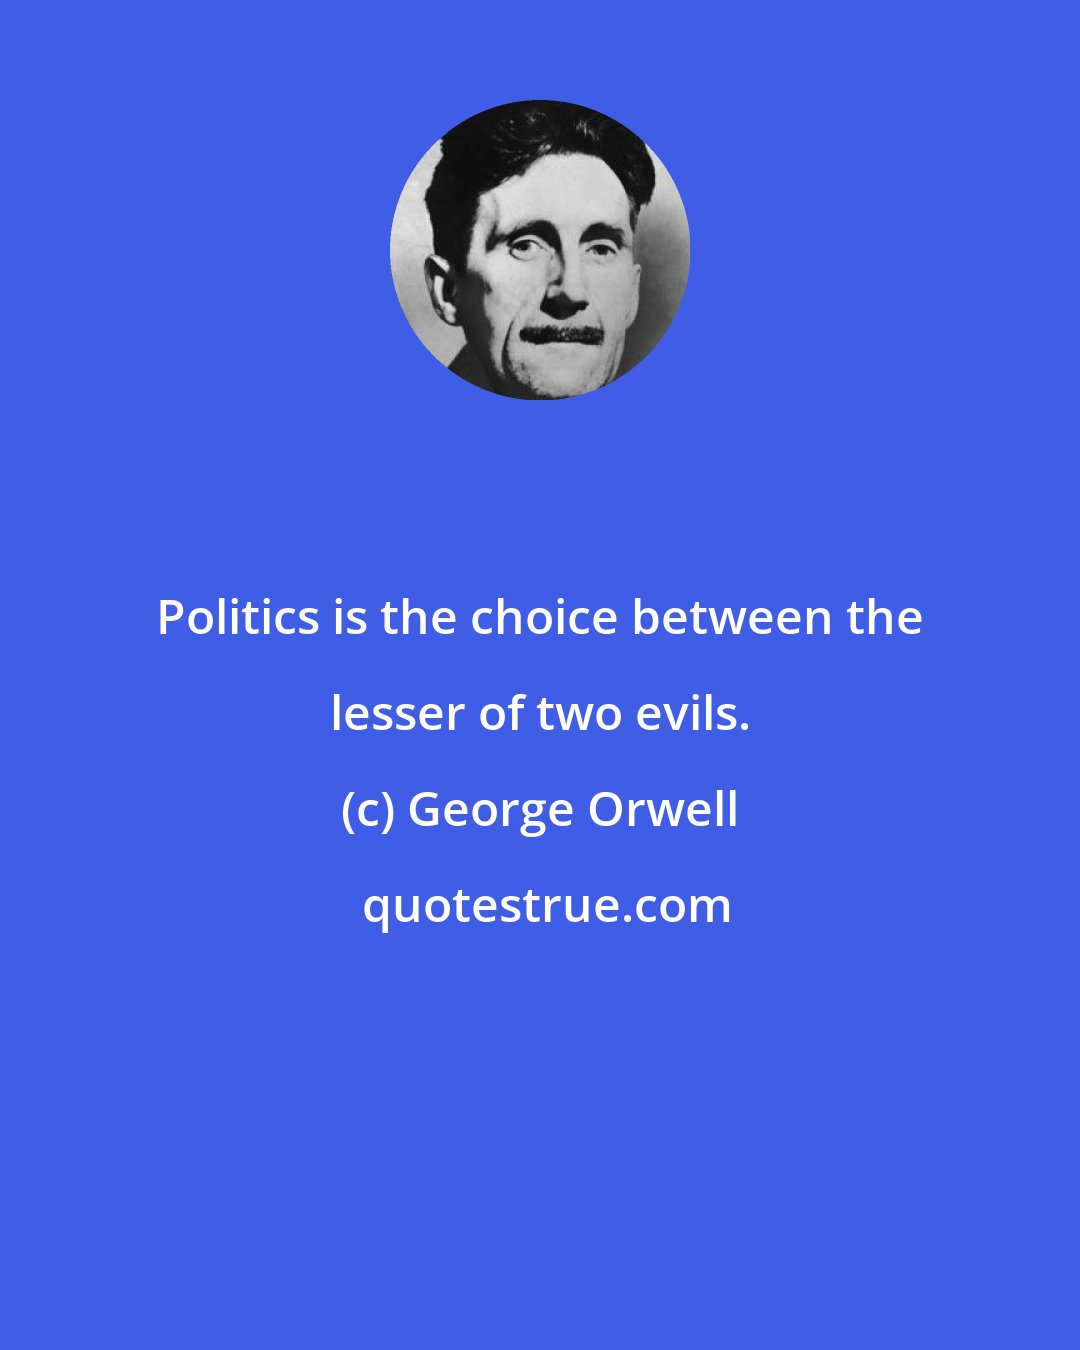 George Orwell: Politics is the choice between the lesser of two evils.